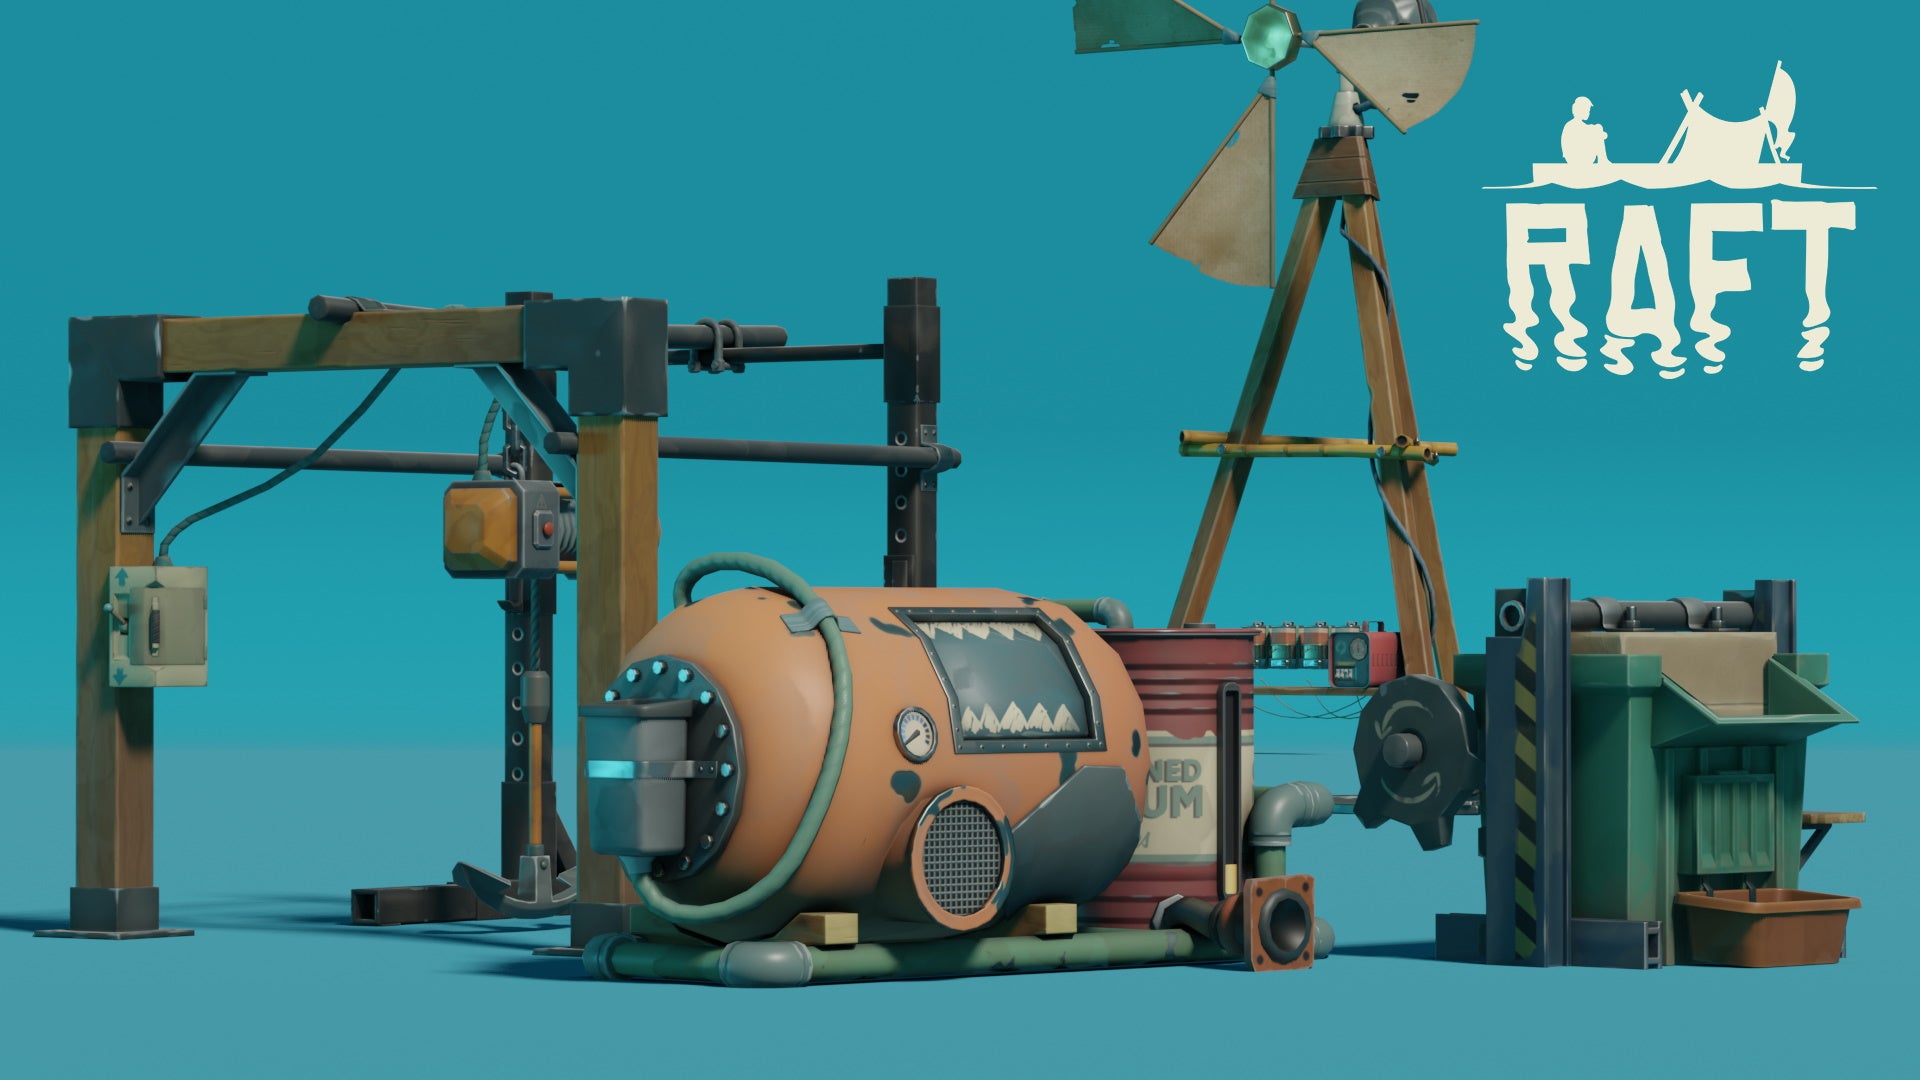 New machines in Raft, including the Wind Turbine and Recycler, against a blue background